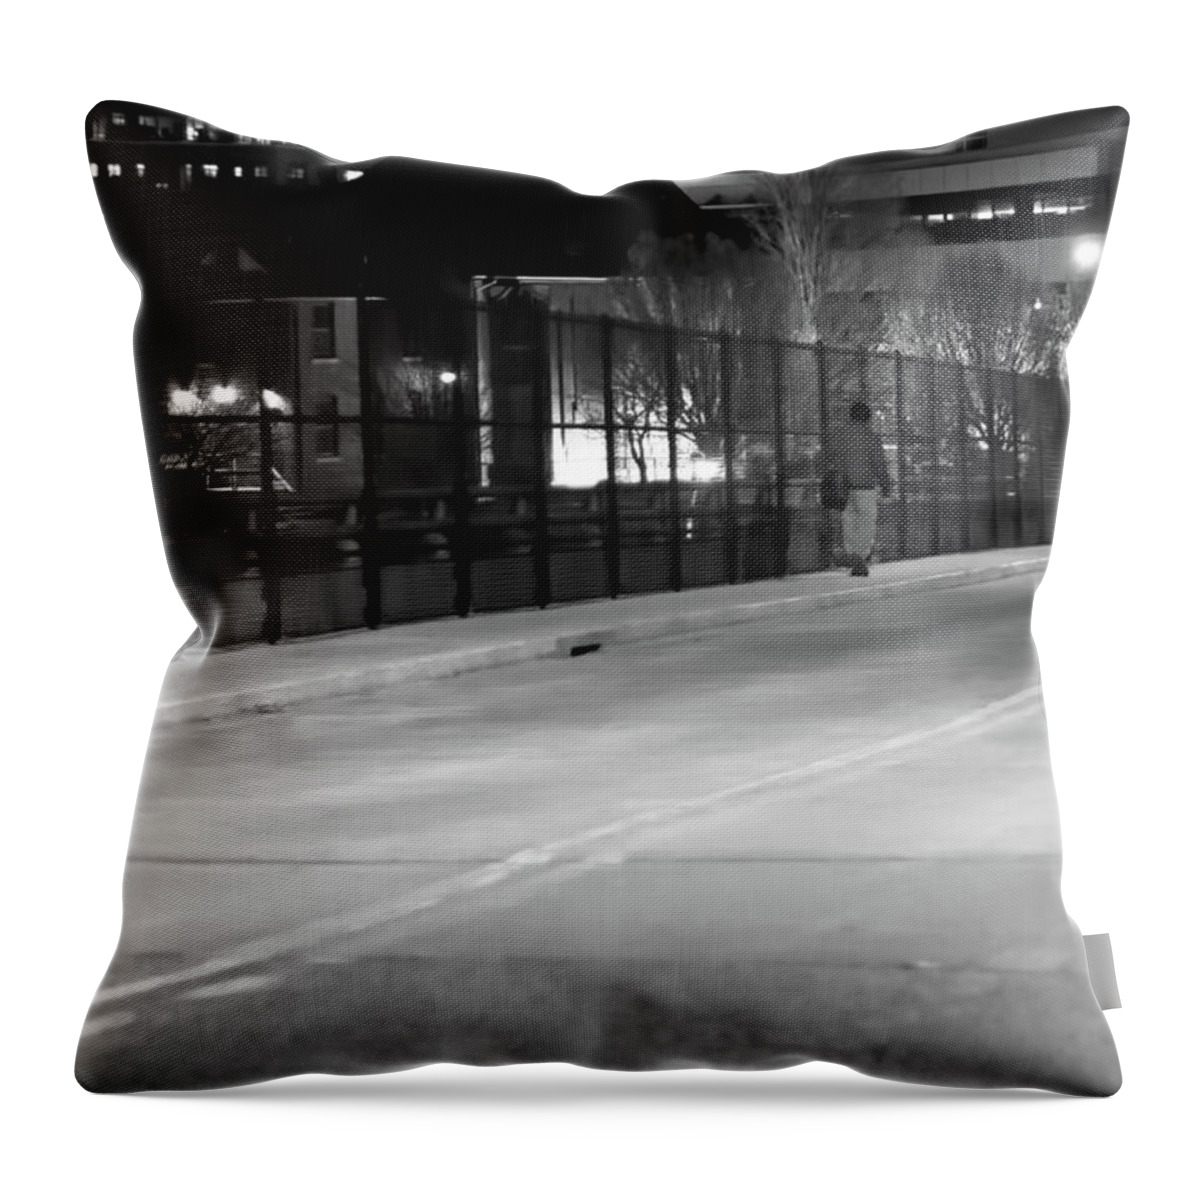 Kansas City Throw Pillow featuring the photograph Lonely Walk by Angie Rayfield